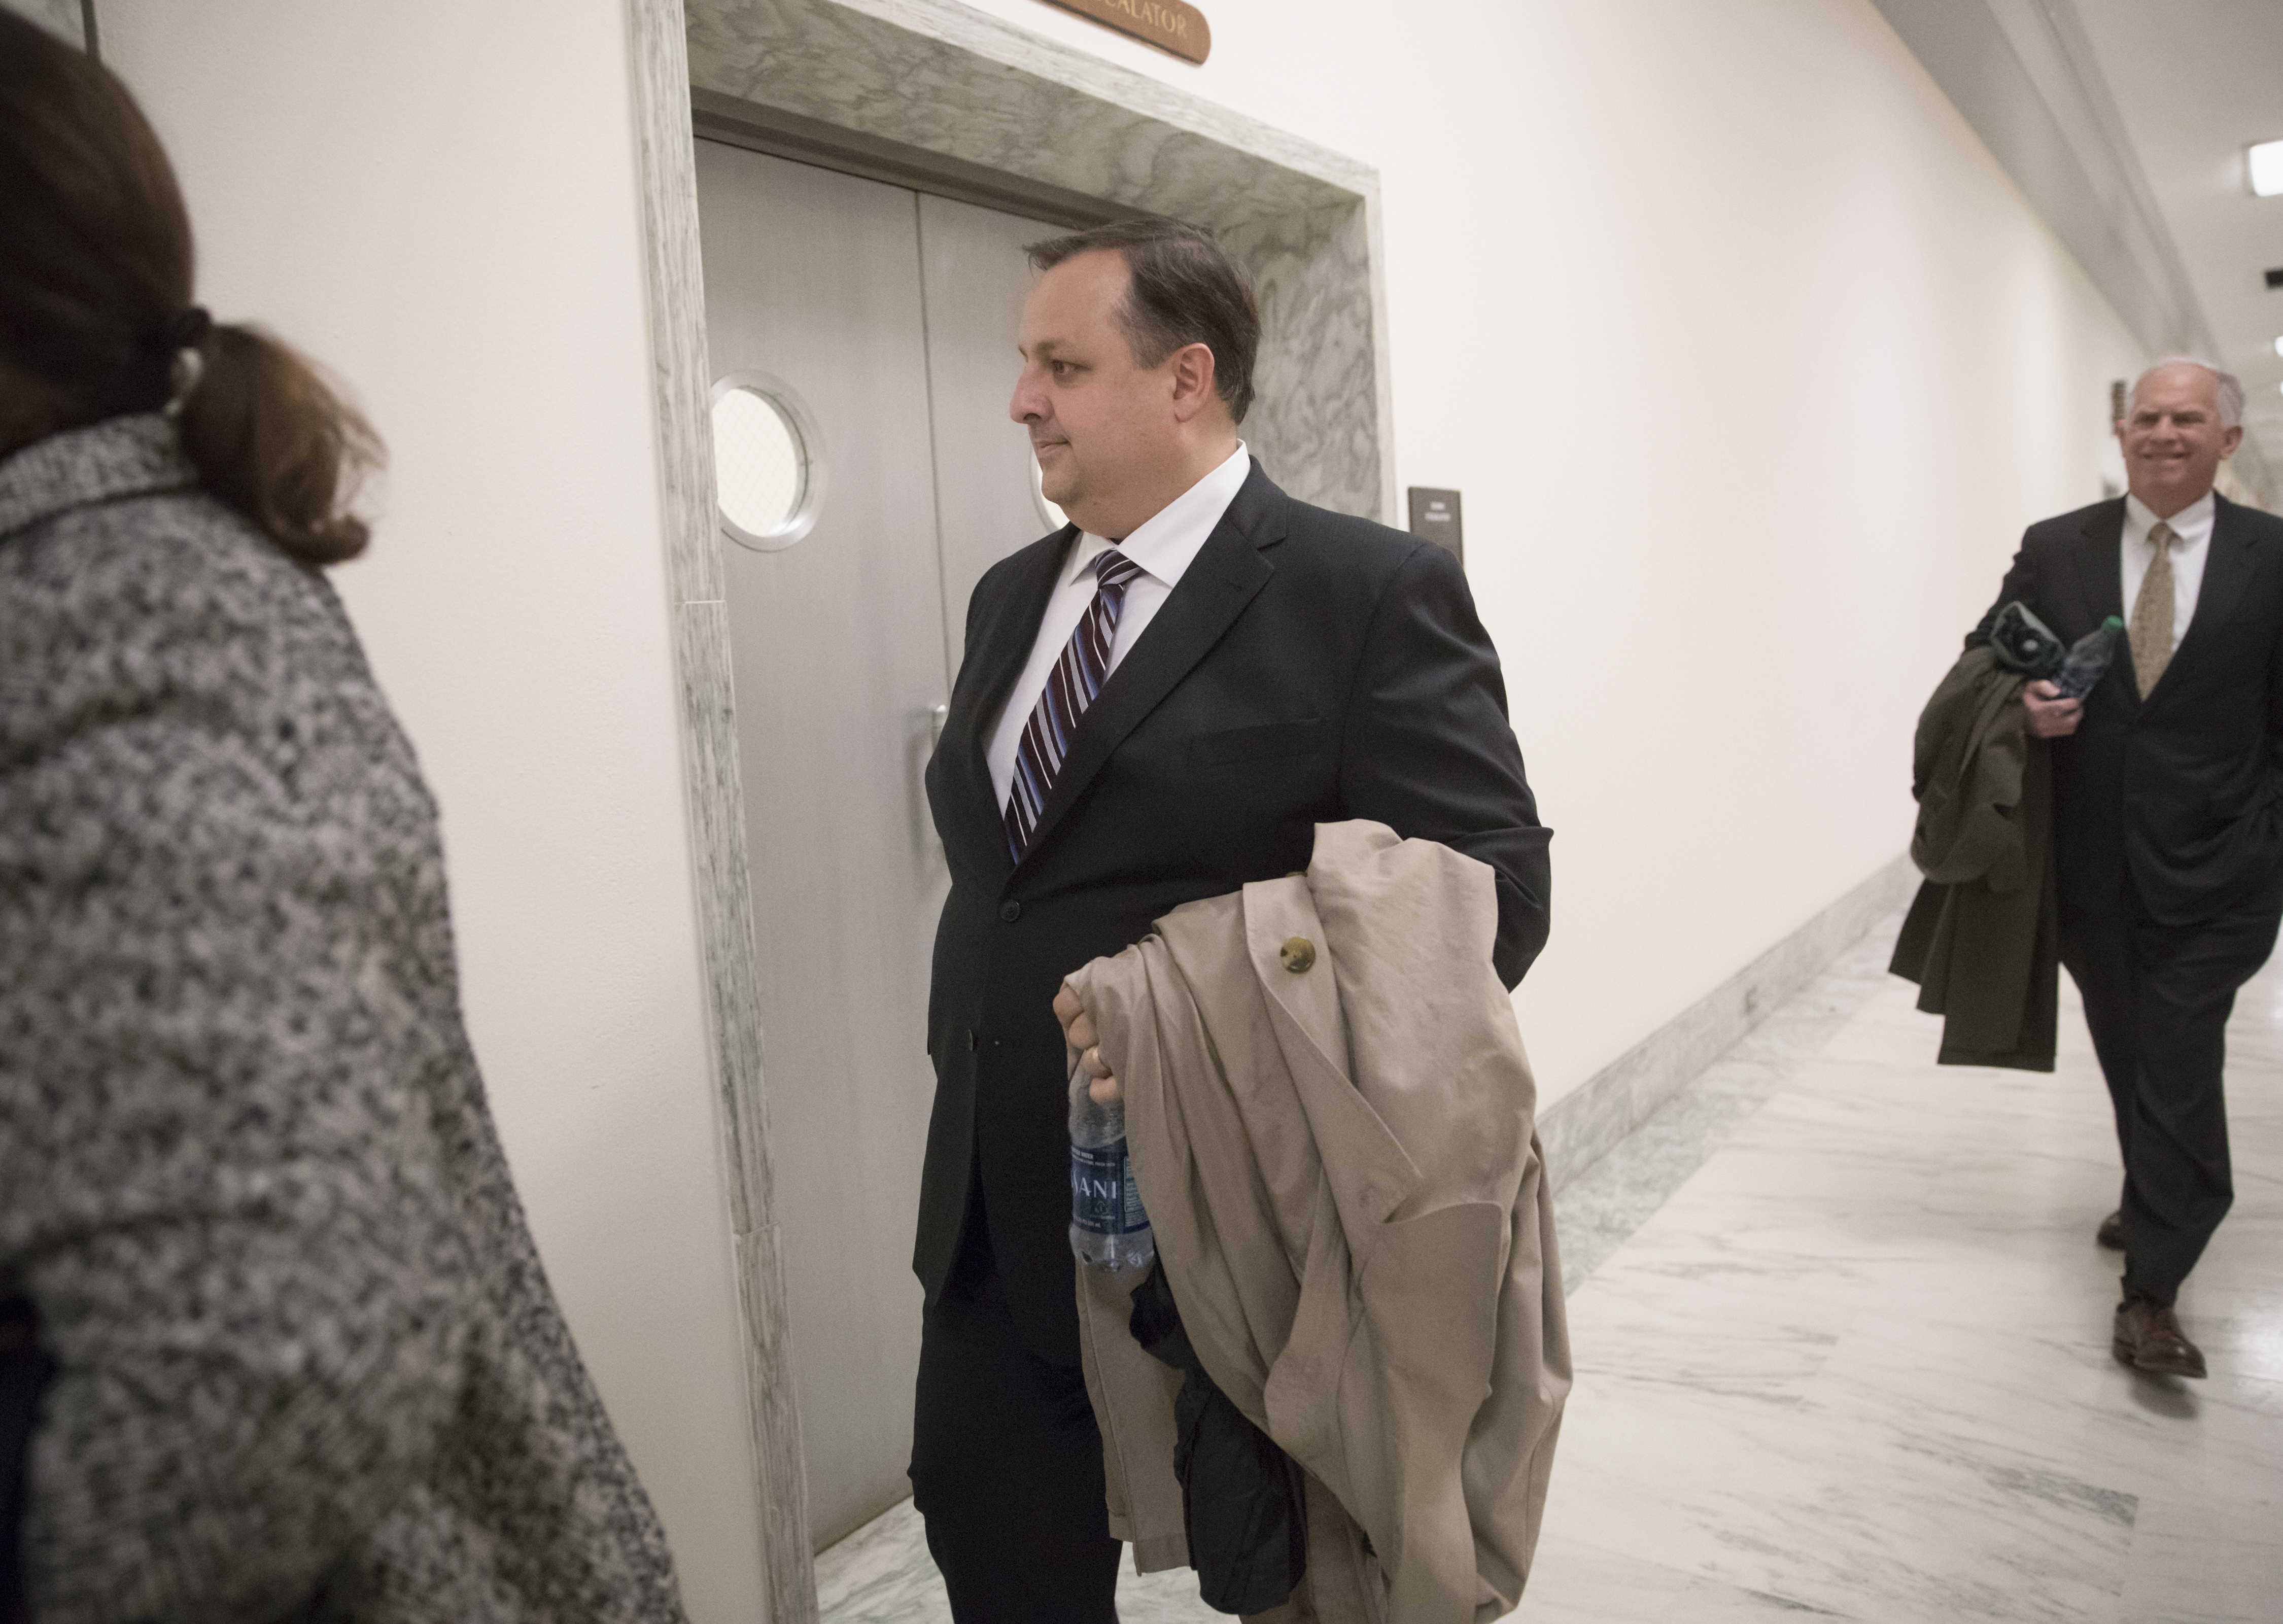 In this Jan. 23, 2017 file photo, Walter M. Shaub Jr., director of the U.S. Office of Government Ethics walks on Capitol Hill in Washington. Donald Trump’s attorneys originally wanted him to submit an updated financial disclosure without certifying the information as true, according to correspondence with the Office of Government Ethics. (J. Scott Applewhite—AP)